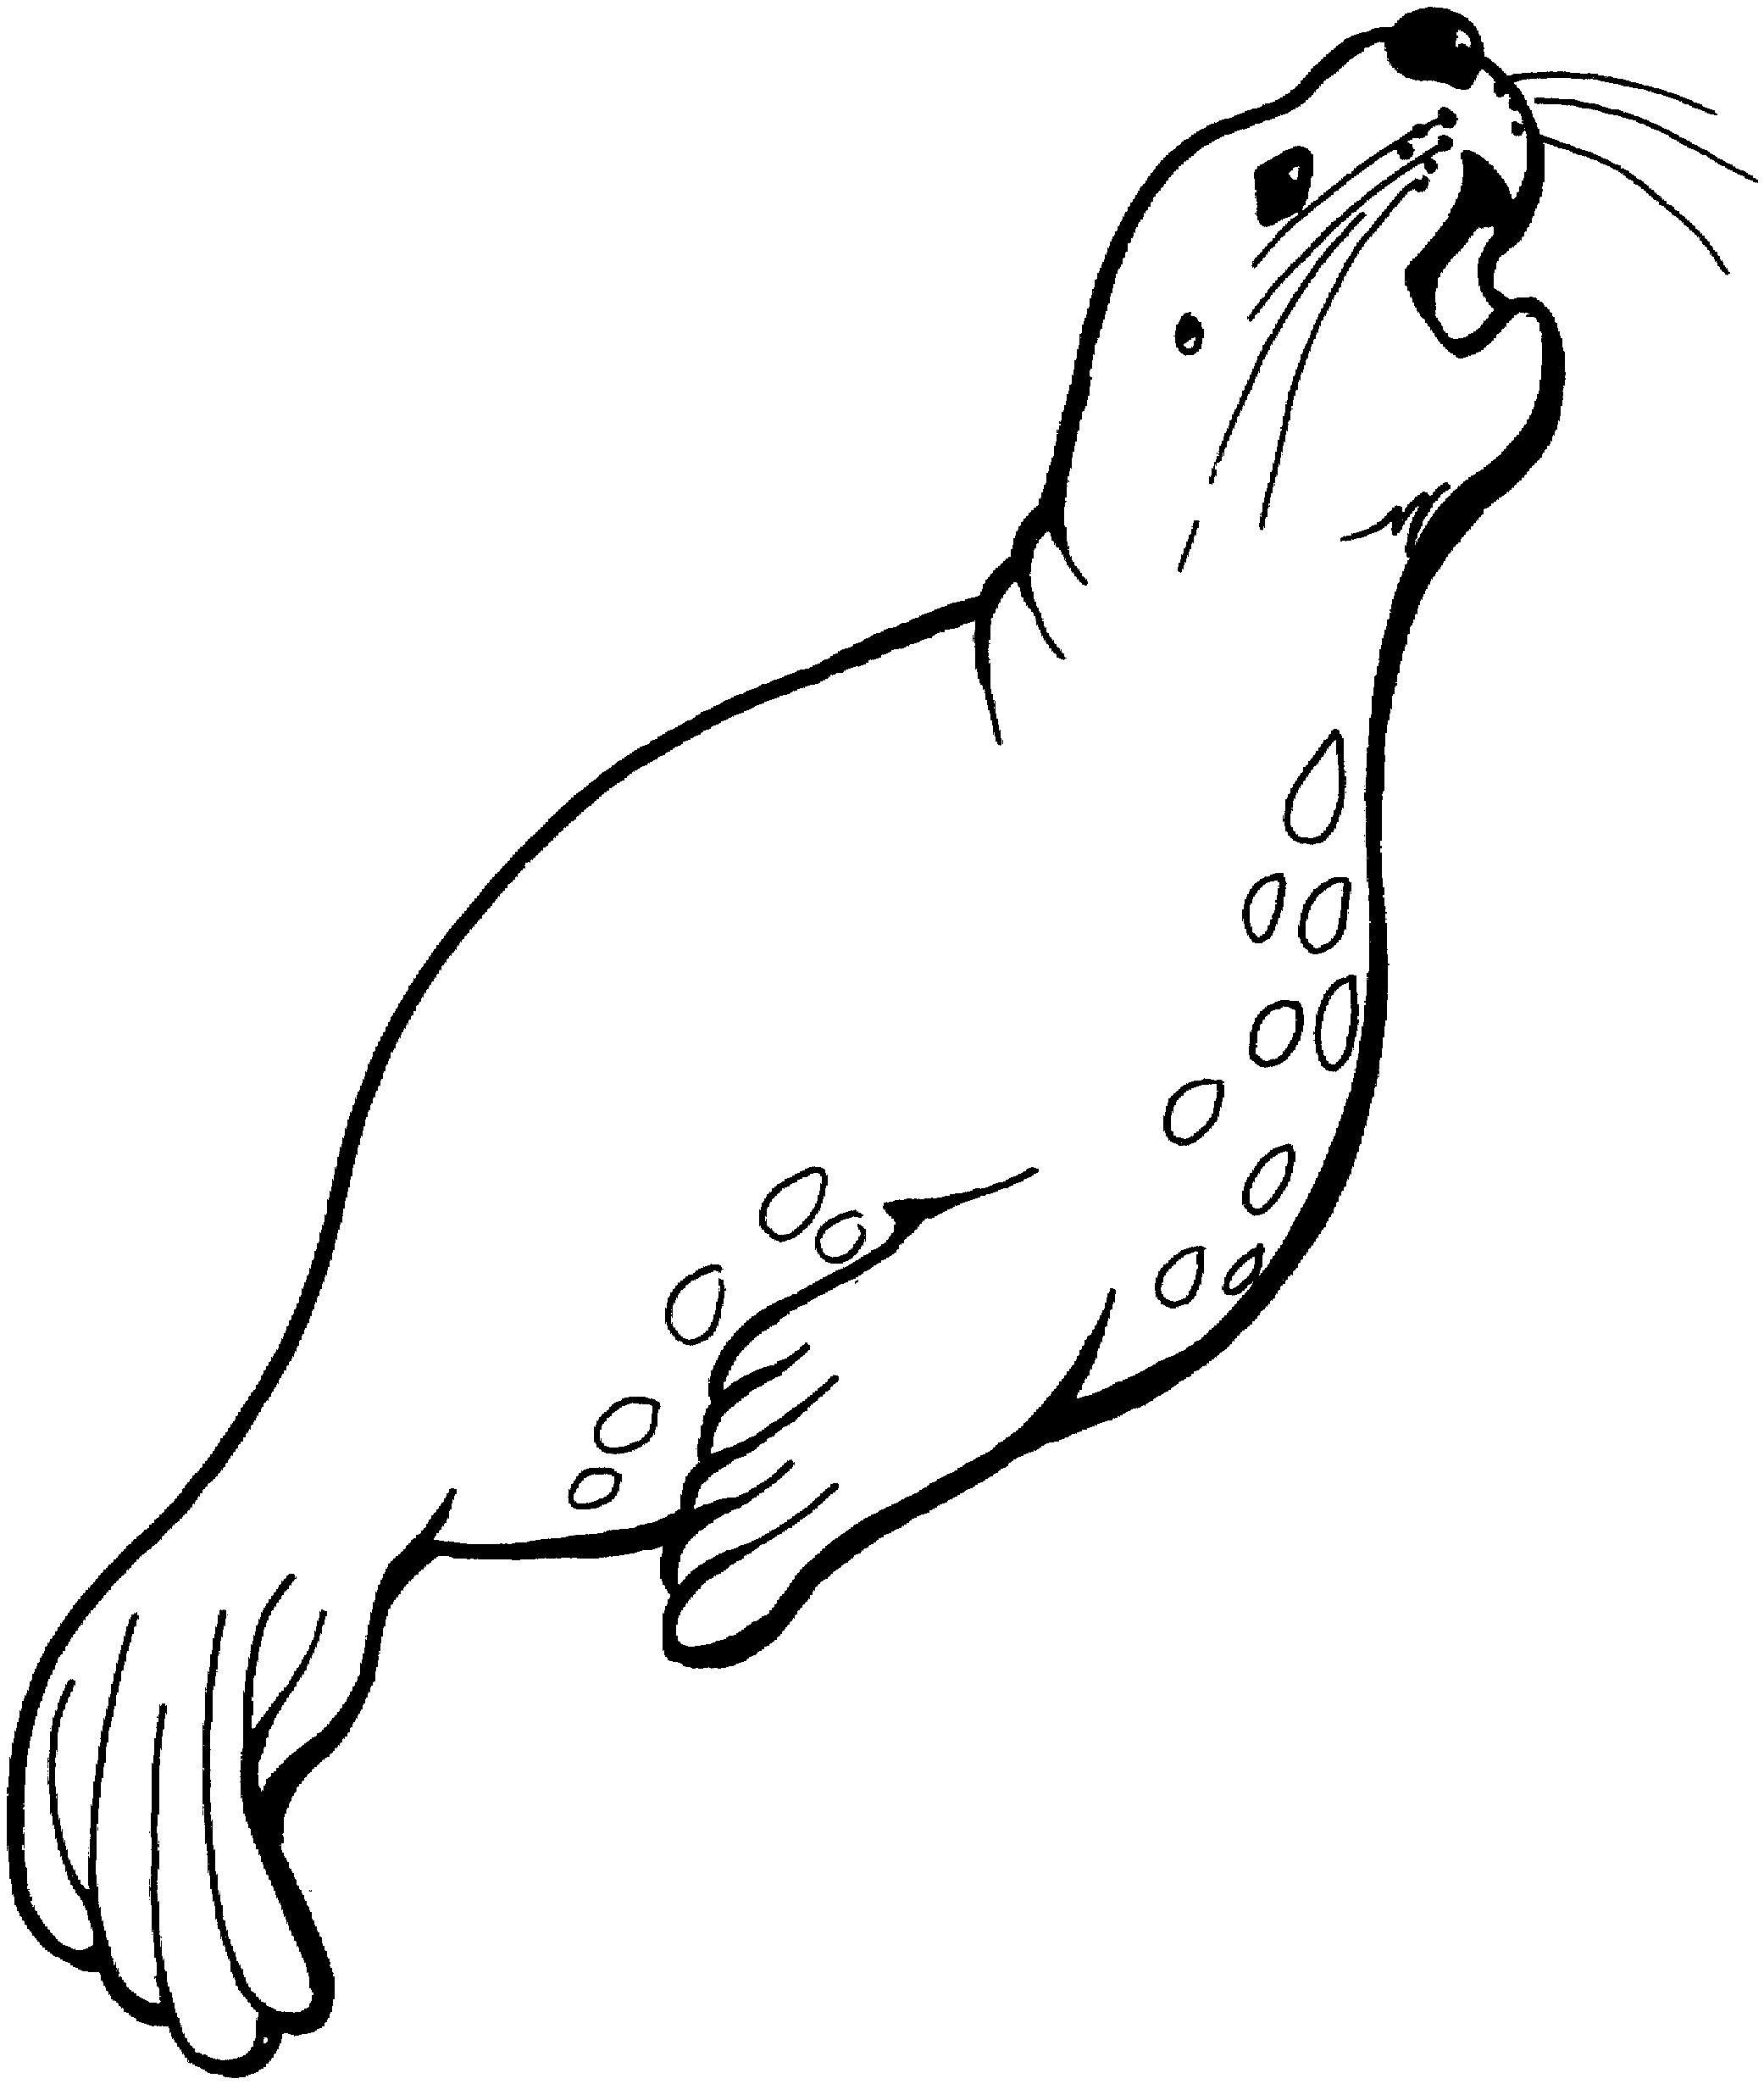 Clip Arts Related To : circus animals line drawing. view all Cute Seal Colo...